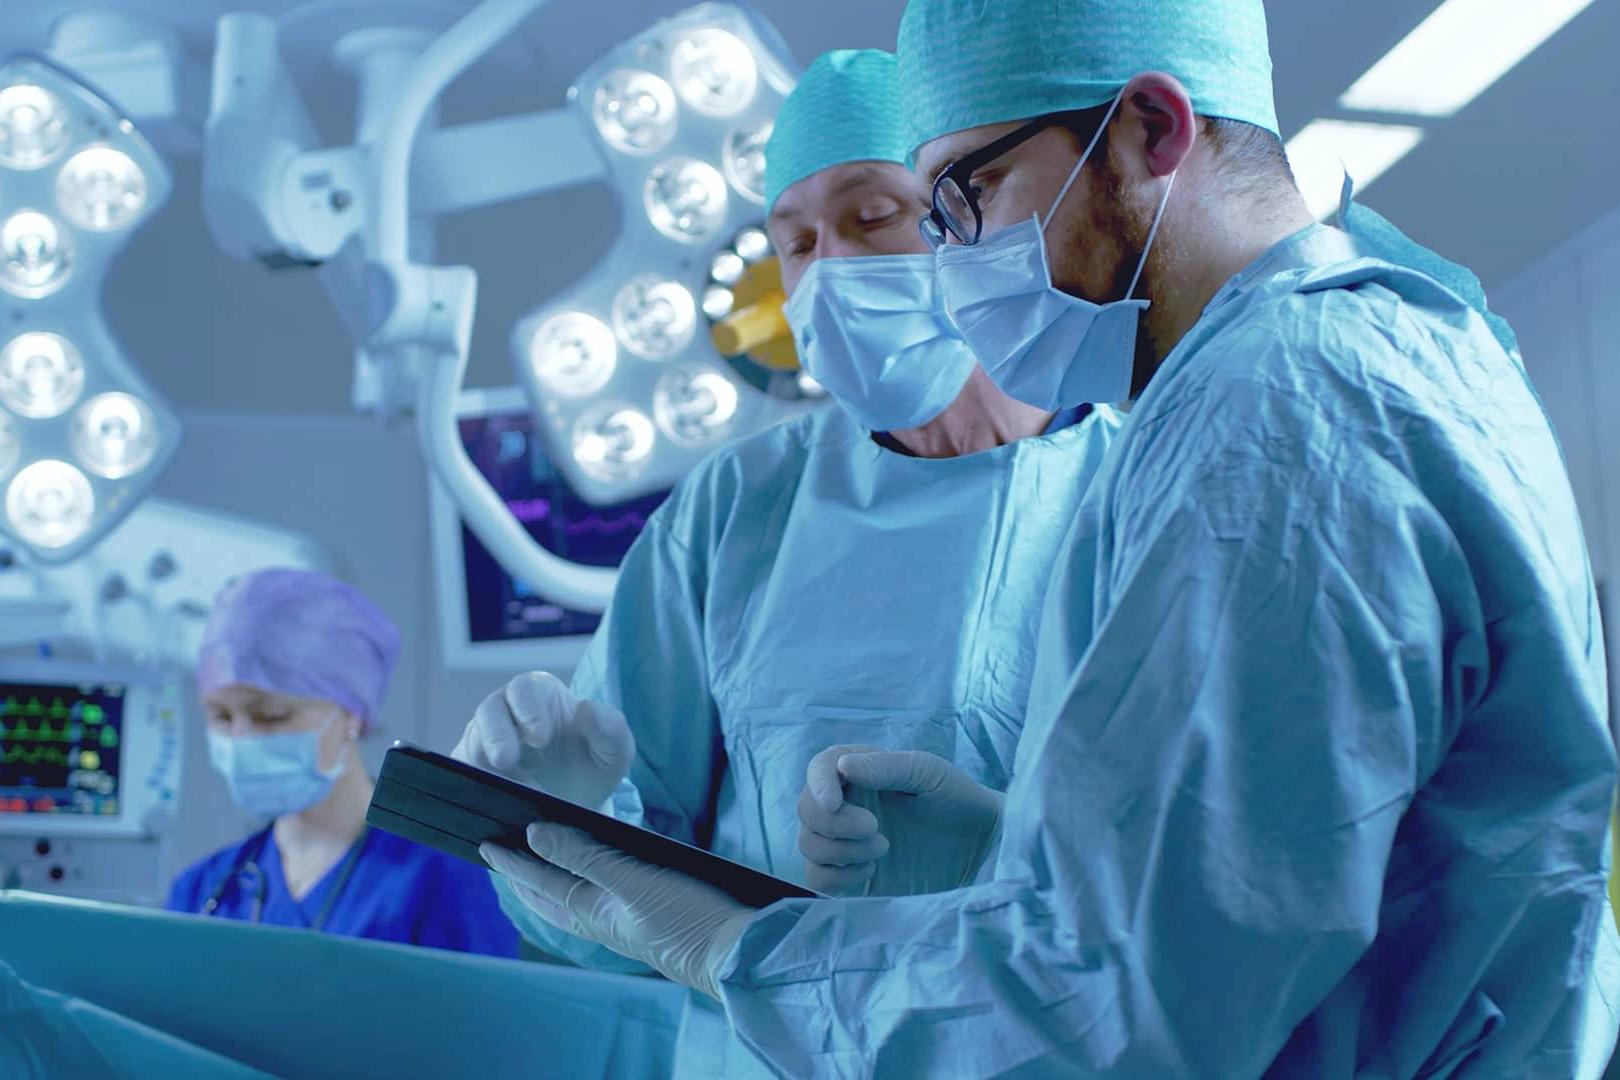 Two doctors working on a tablet in the OR.